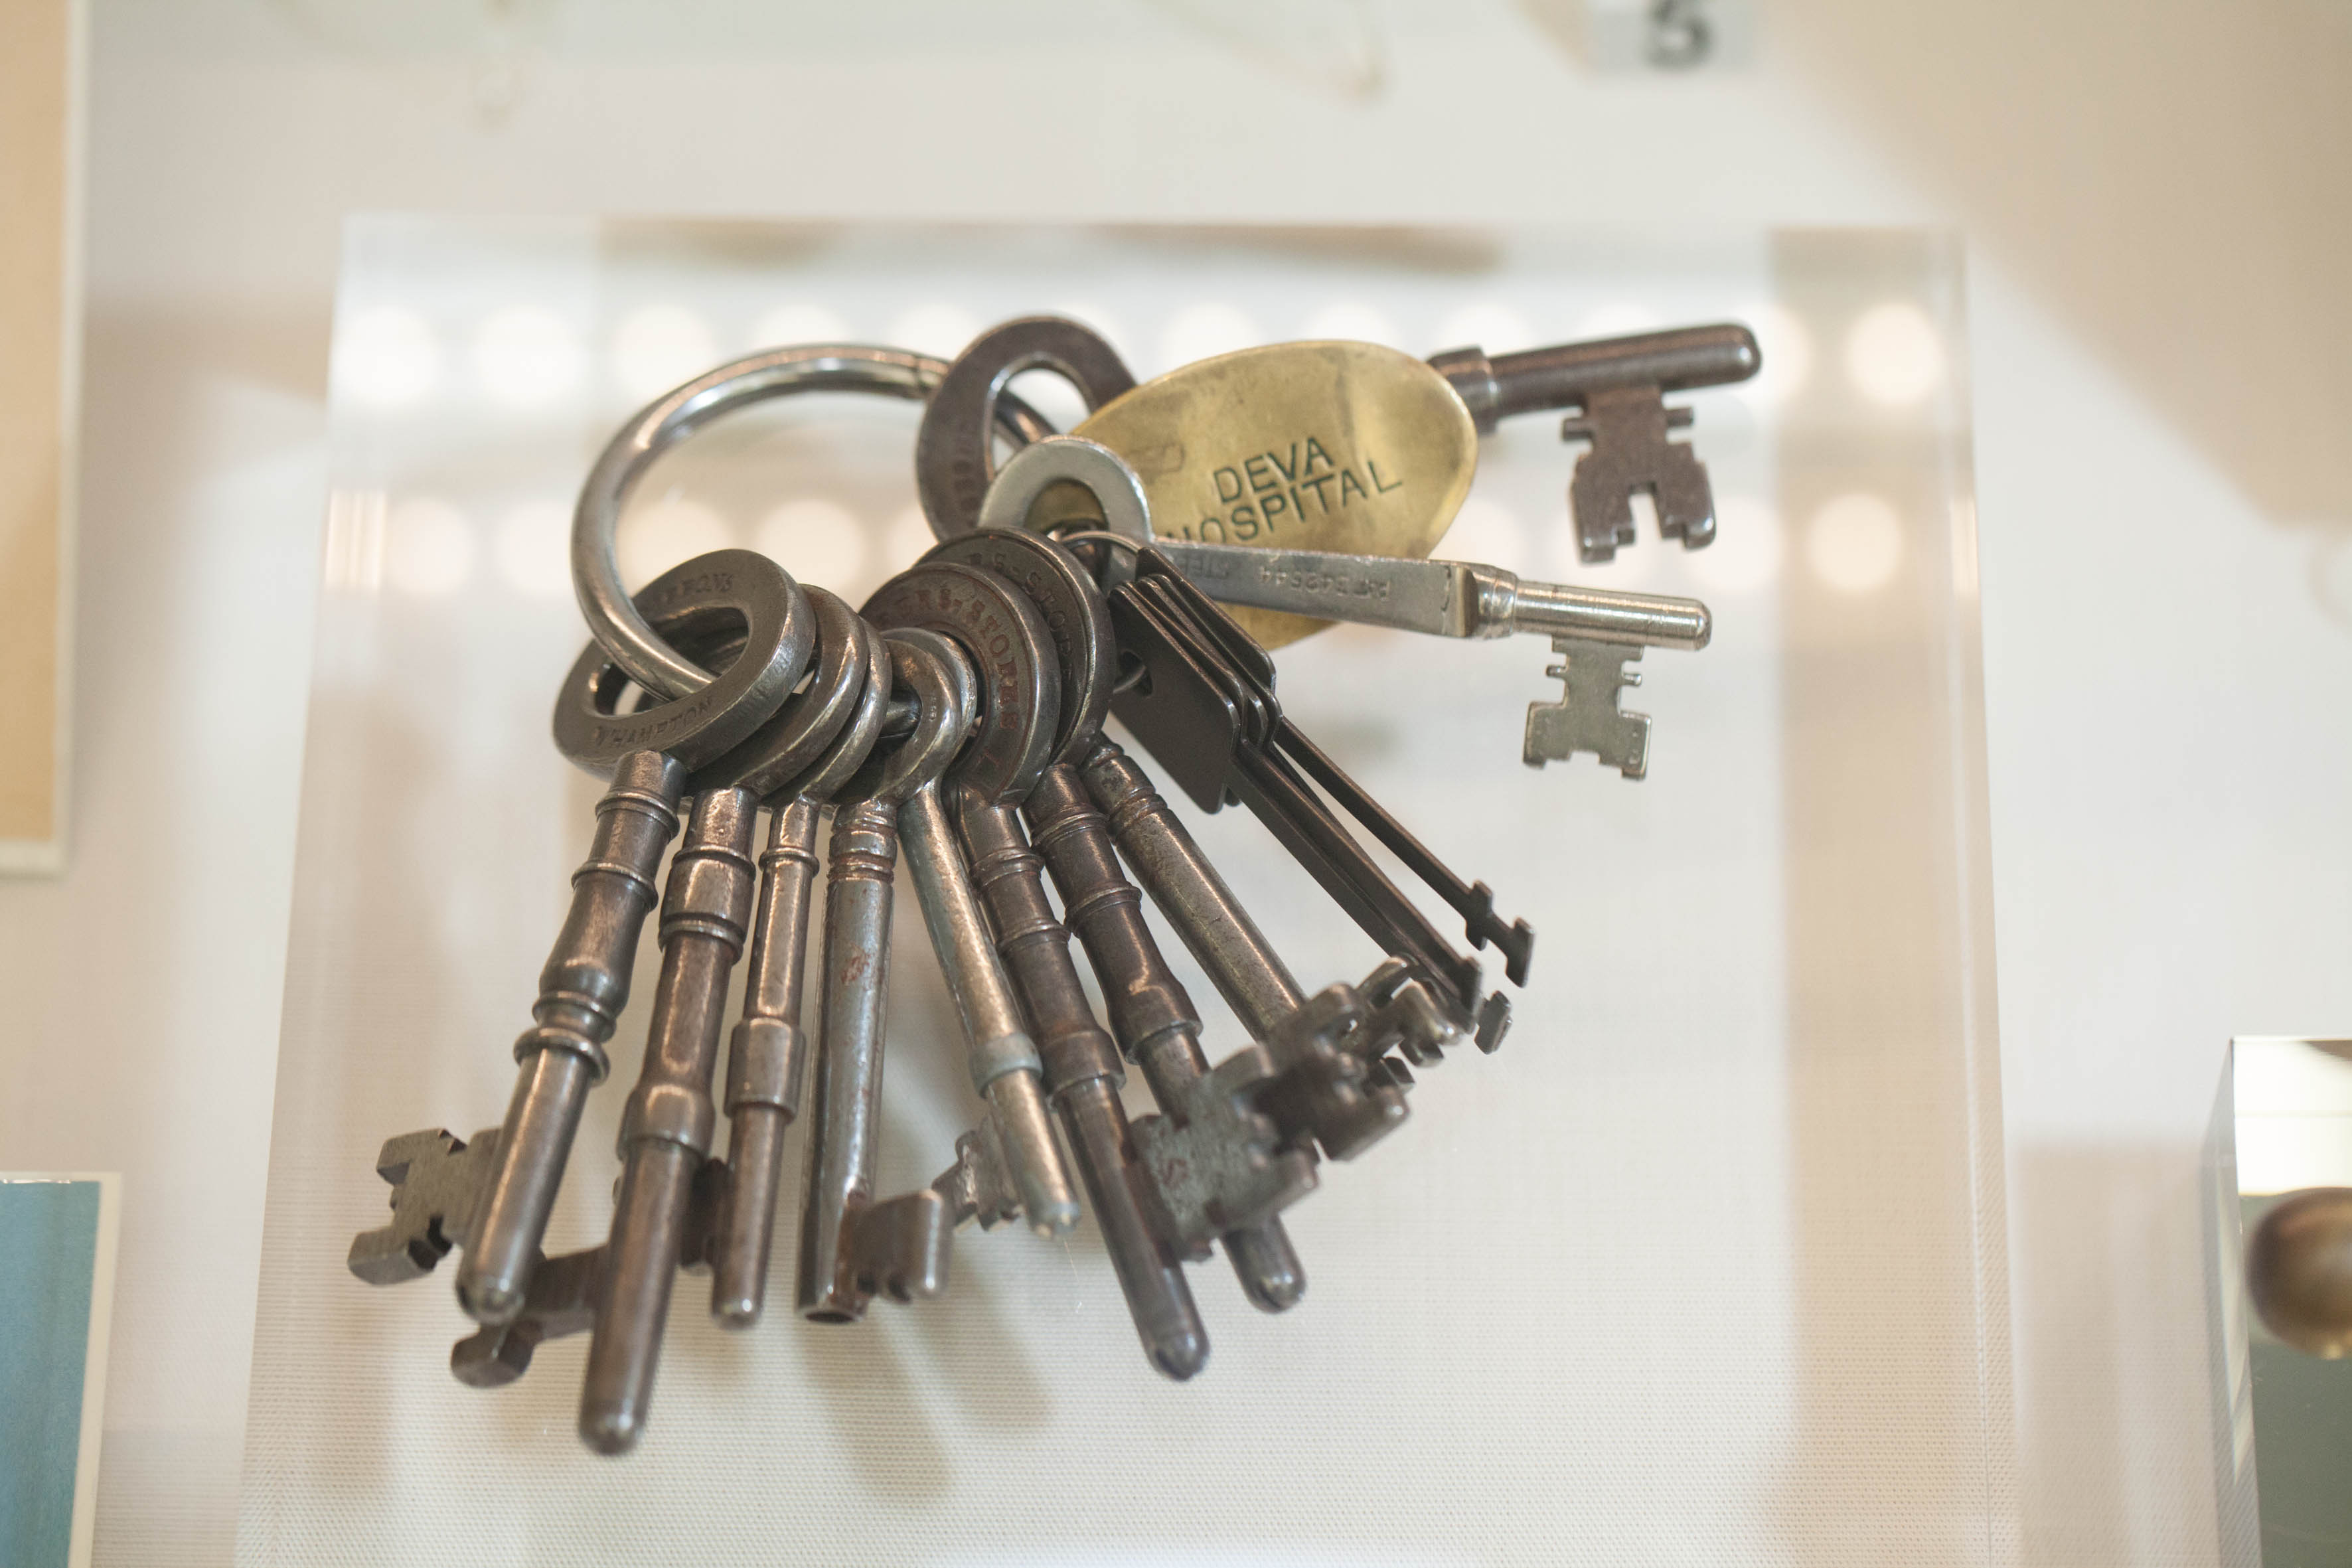 A selection of old fashioned keys on a keyring.